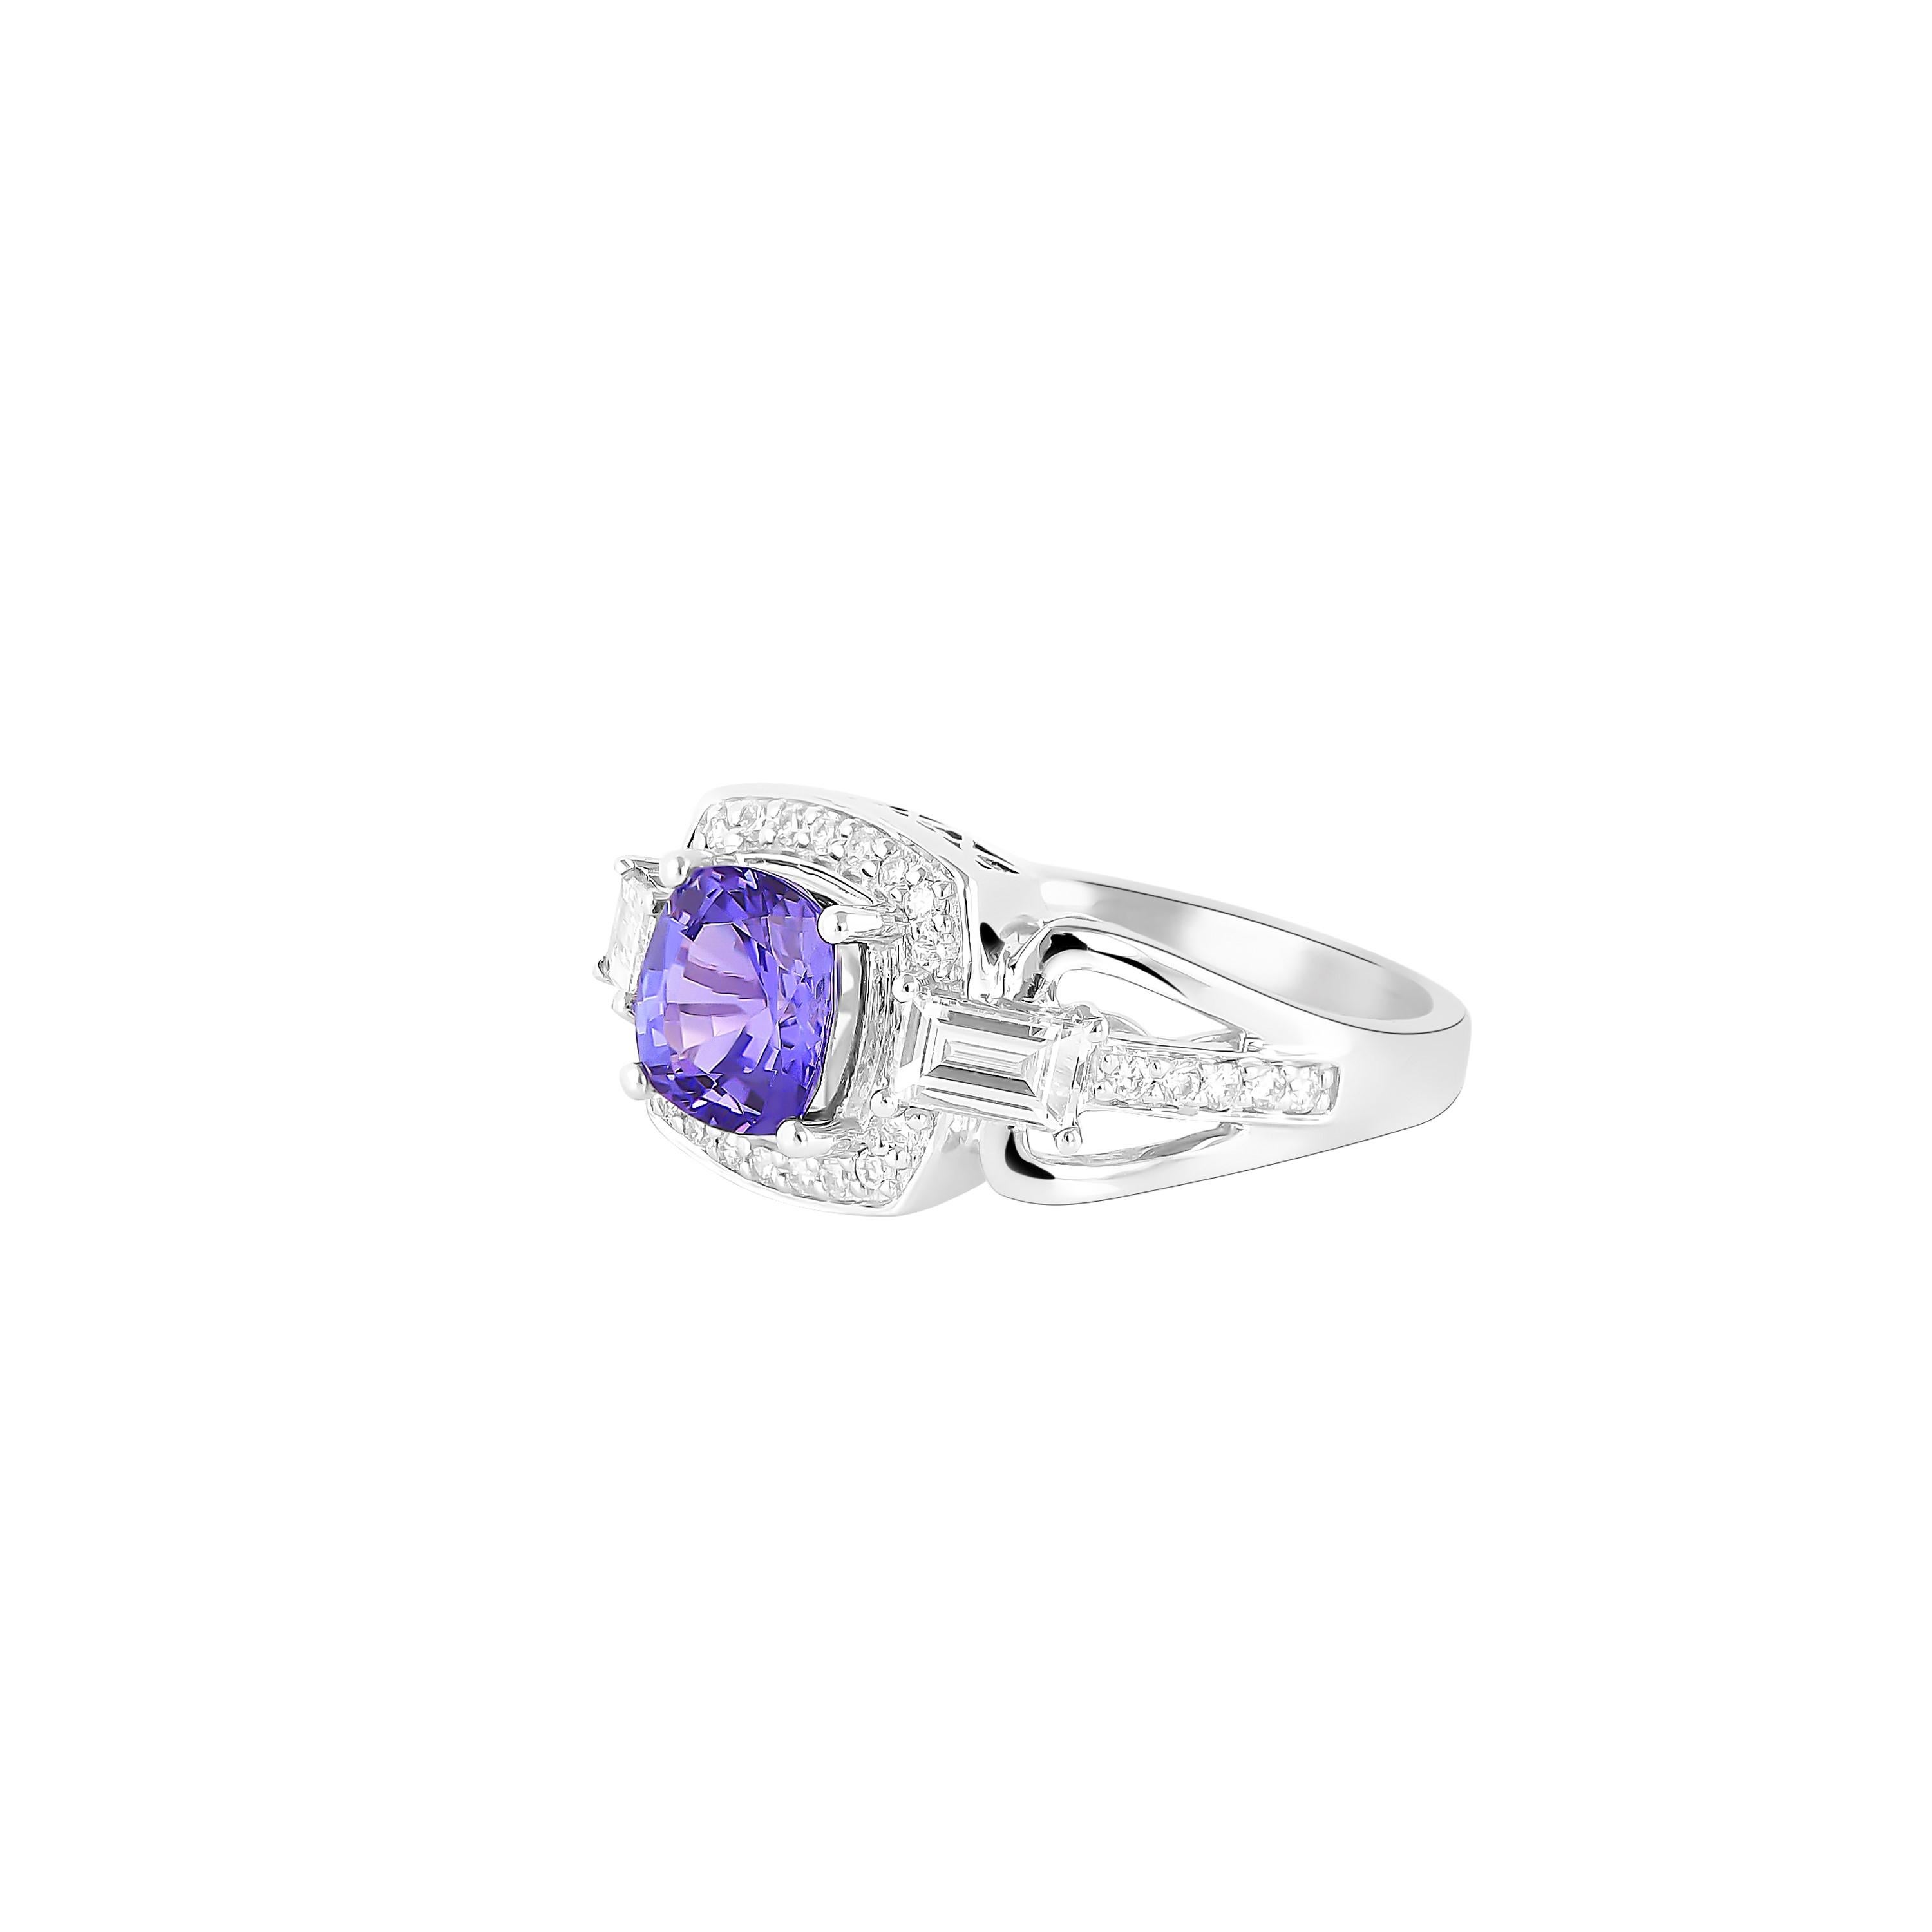 Contemporary 1.516 Carat Tanzanite Ring in 18 Karat White Gold with Diamond. For Sale